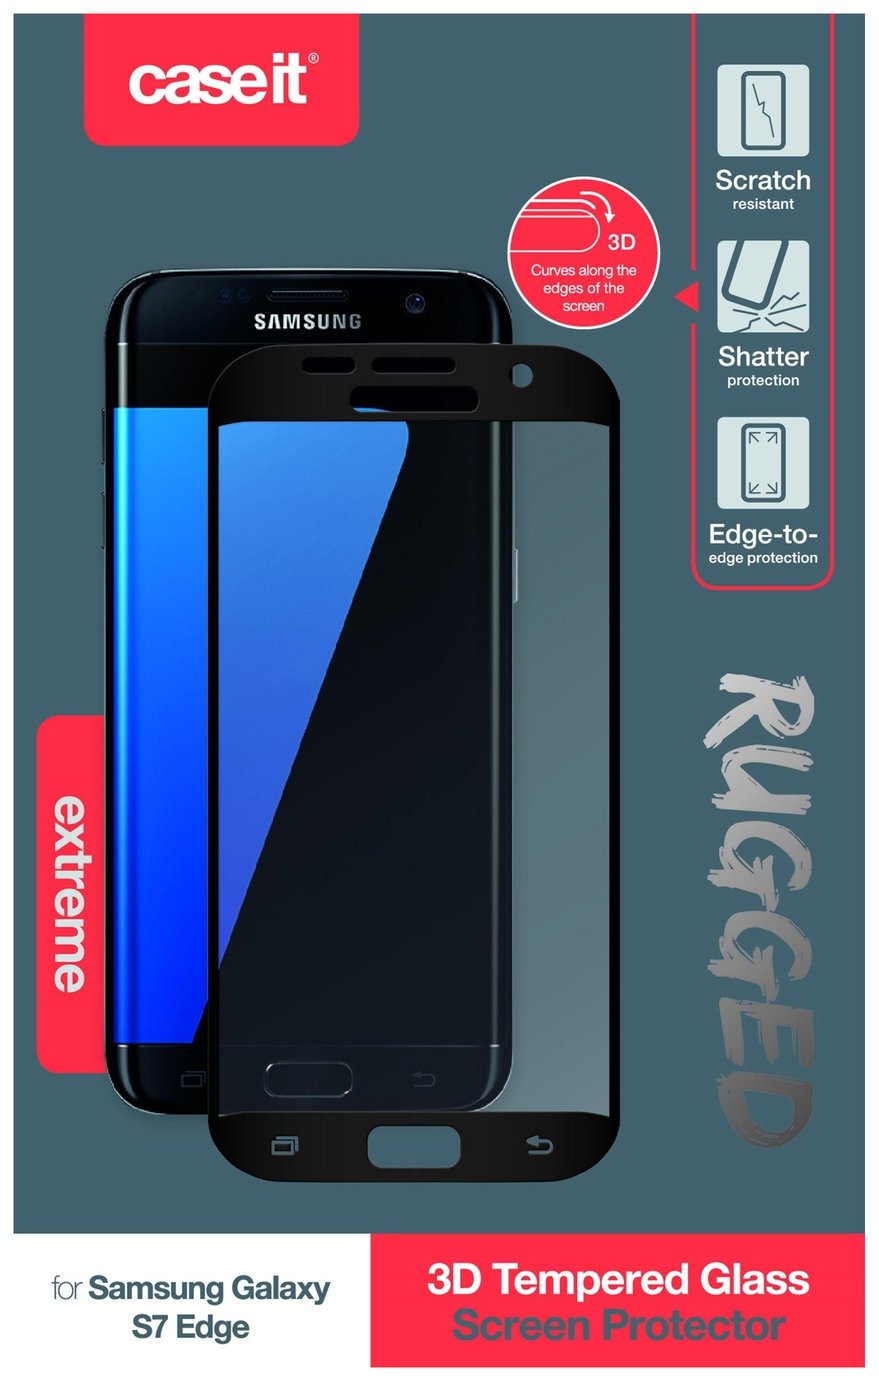 Case It Samsung Galaxy S7 Edge Glass Screen Protector review